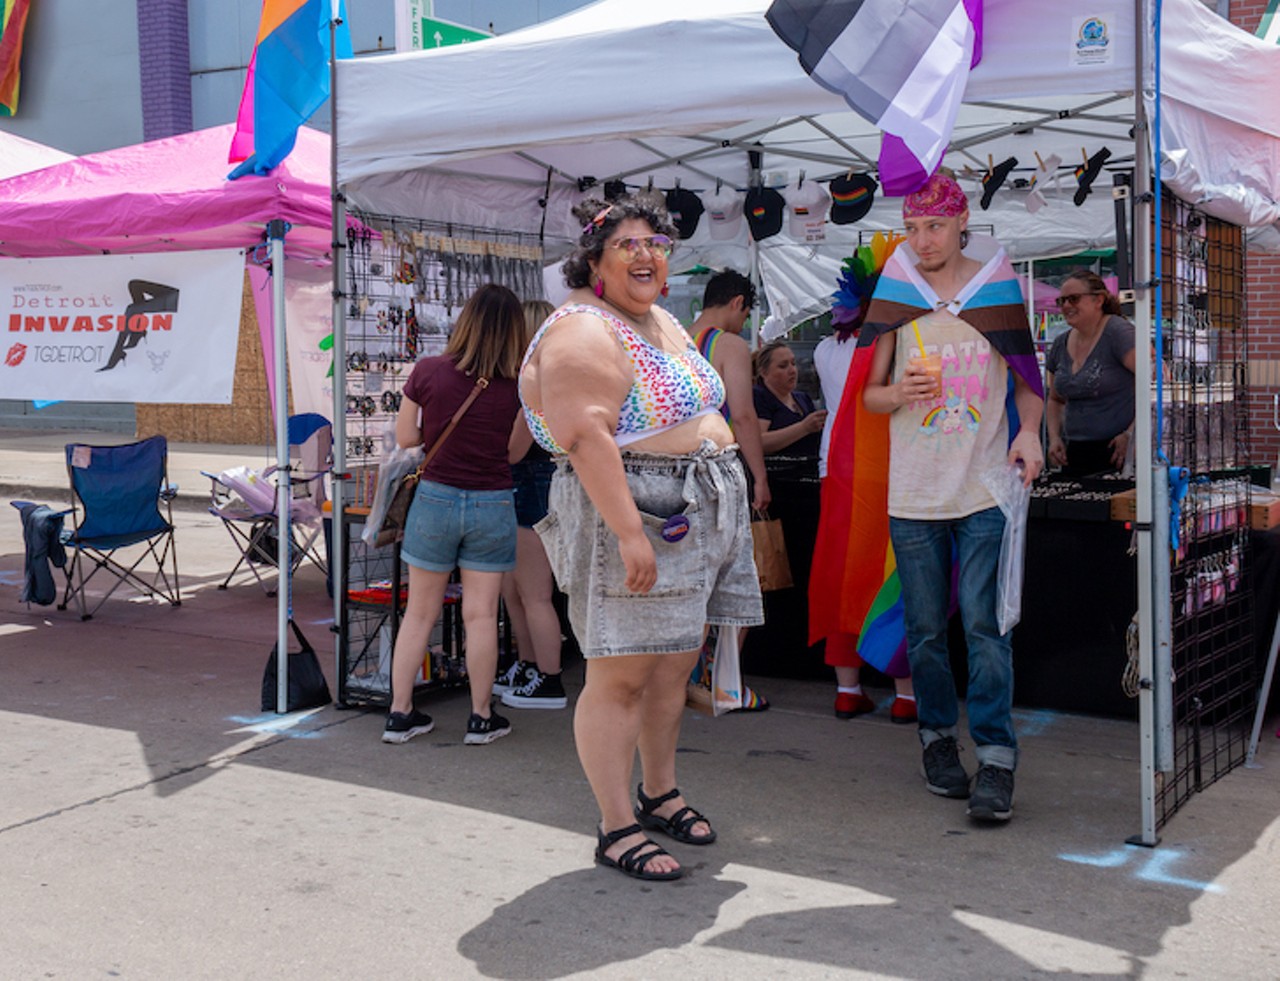 All the beautiful people we saw celebrating at Ferndale Pride